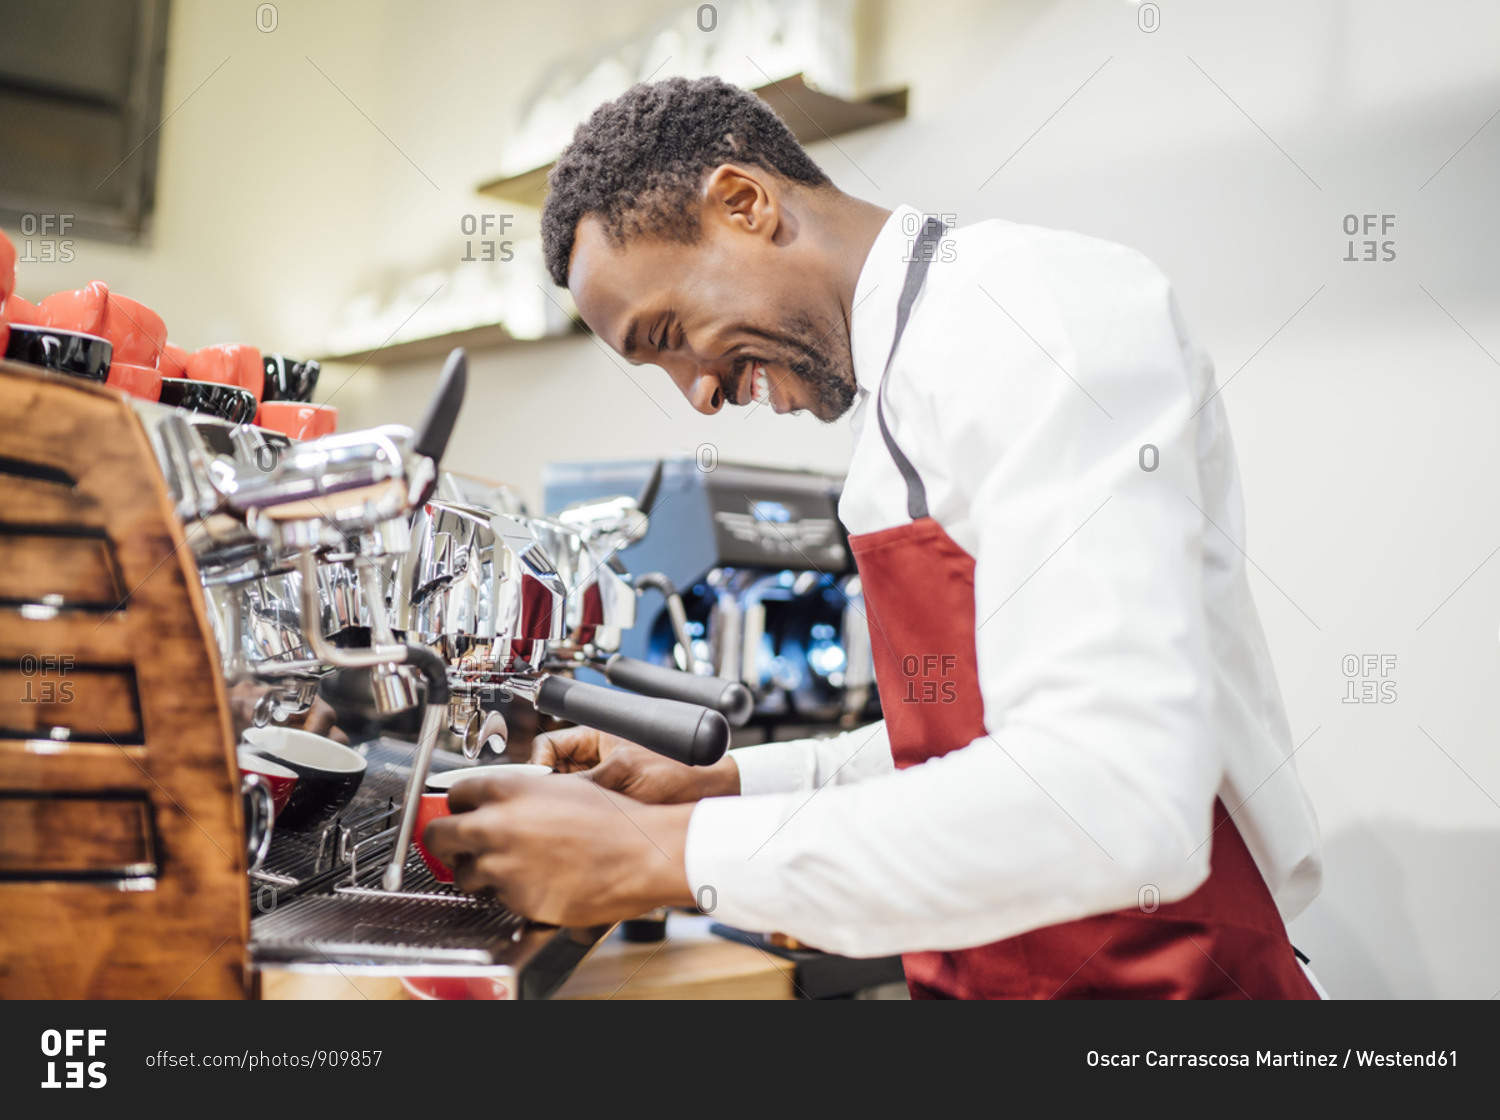 Smiling barista preparing a coffee in a coffee shop stock
photo - OFFSET